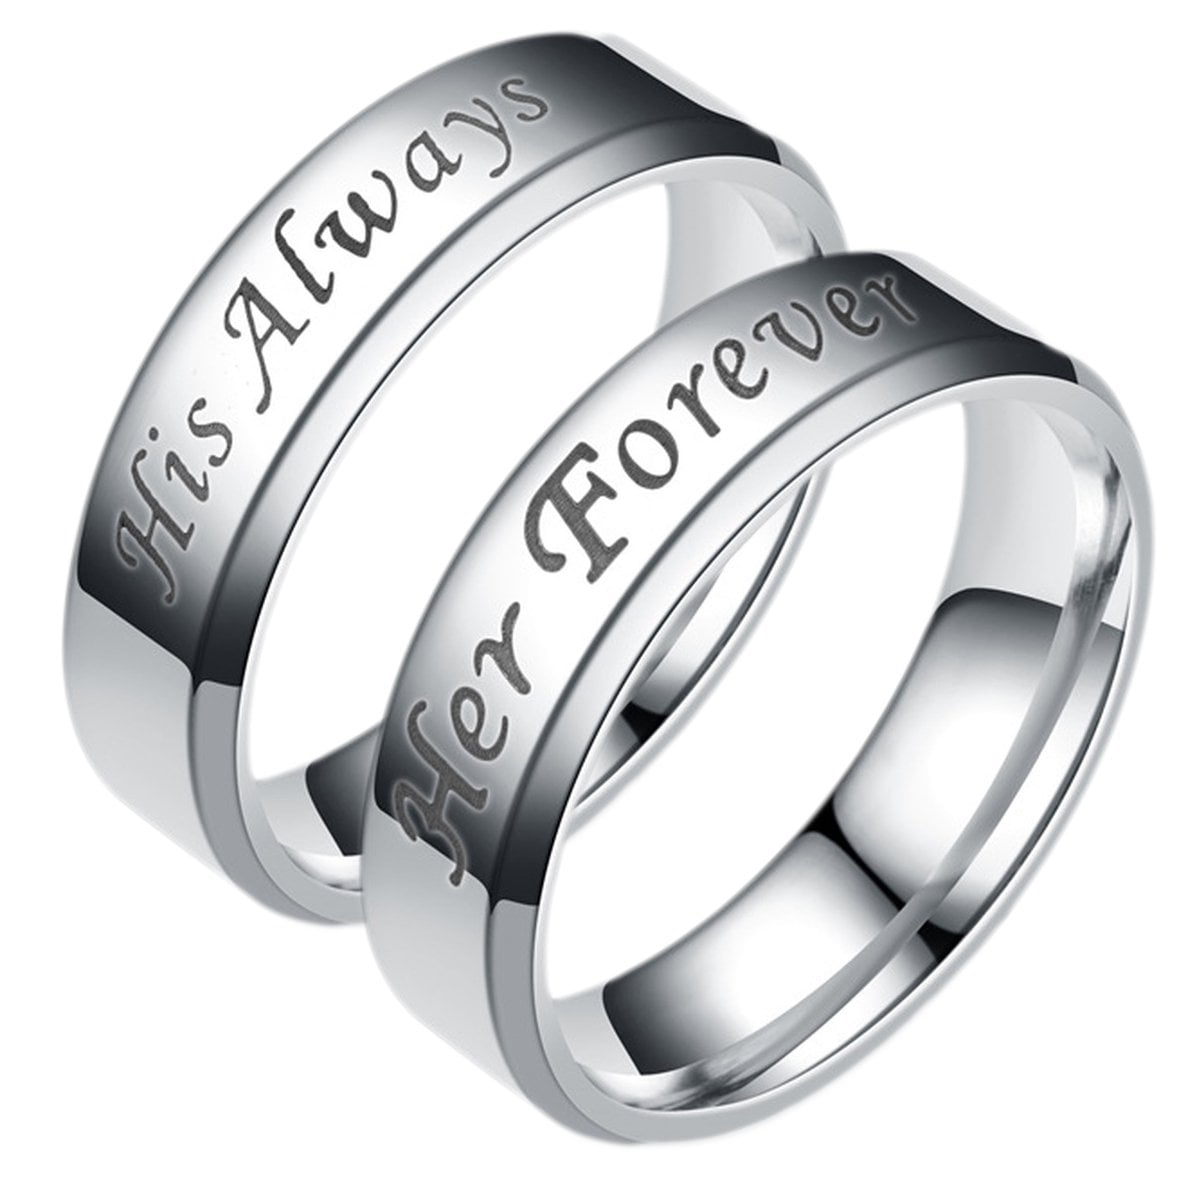 Relationship promise rings for couples | My Couple Goal